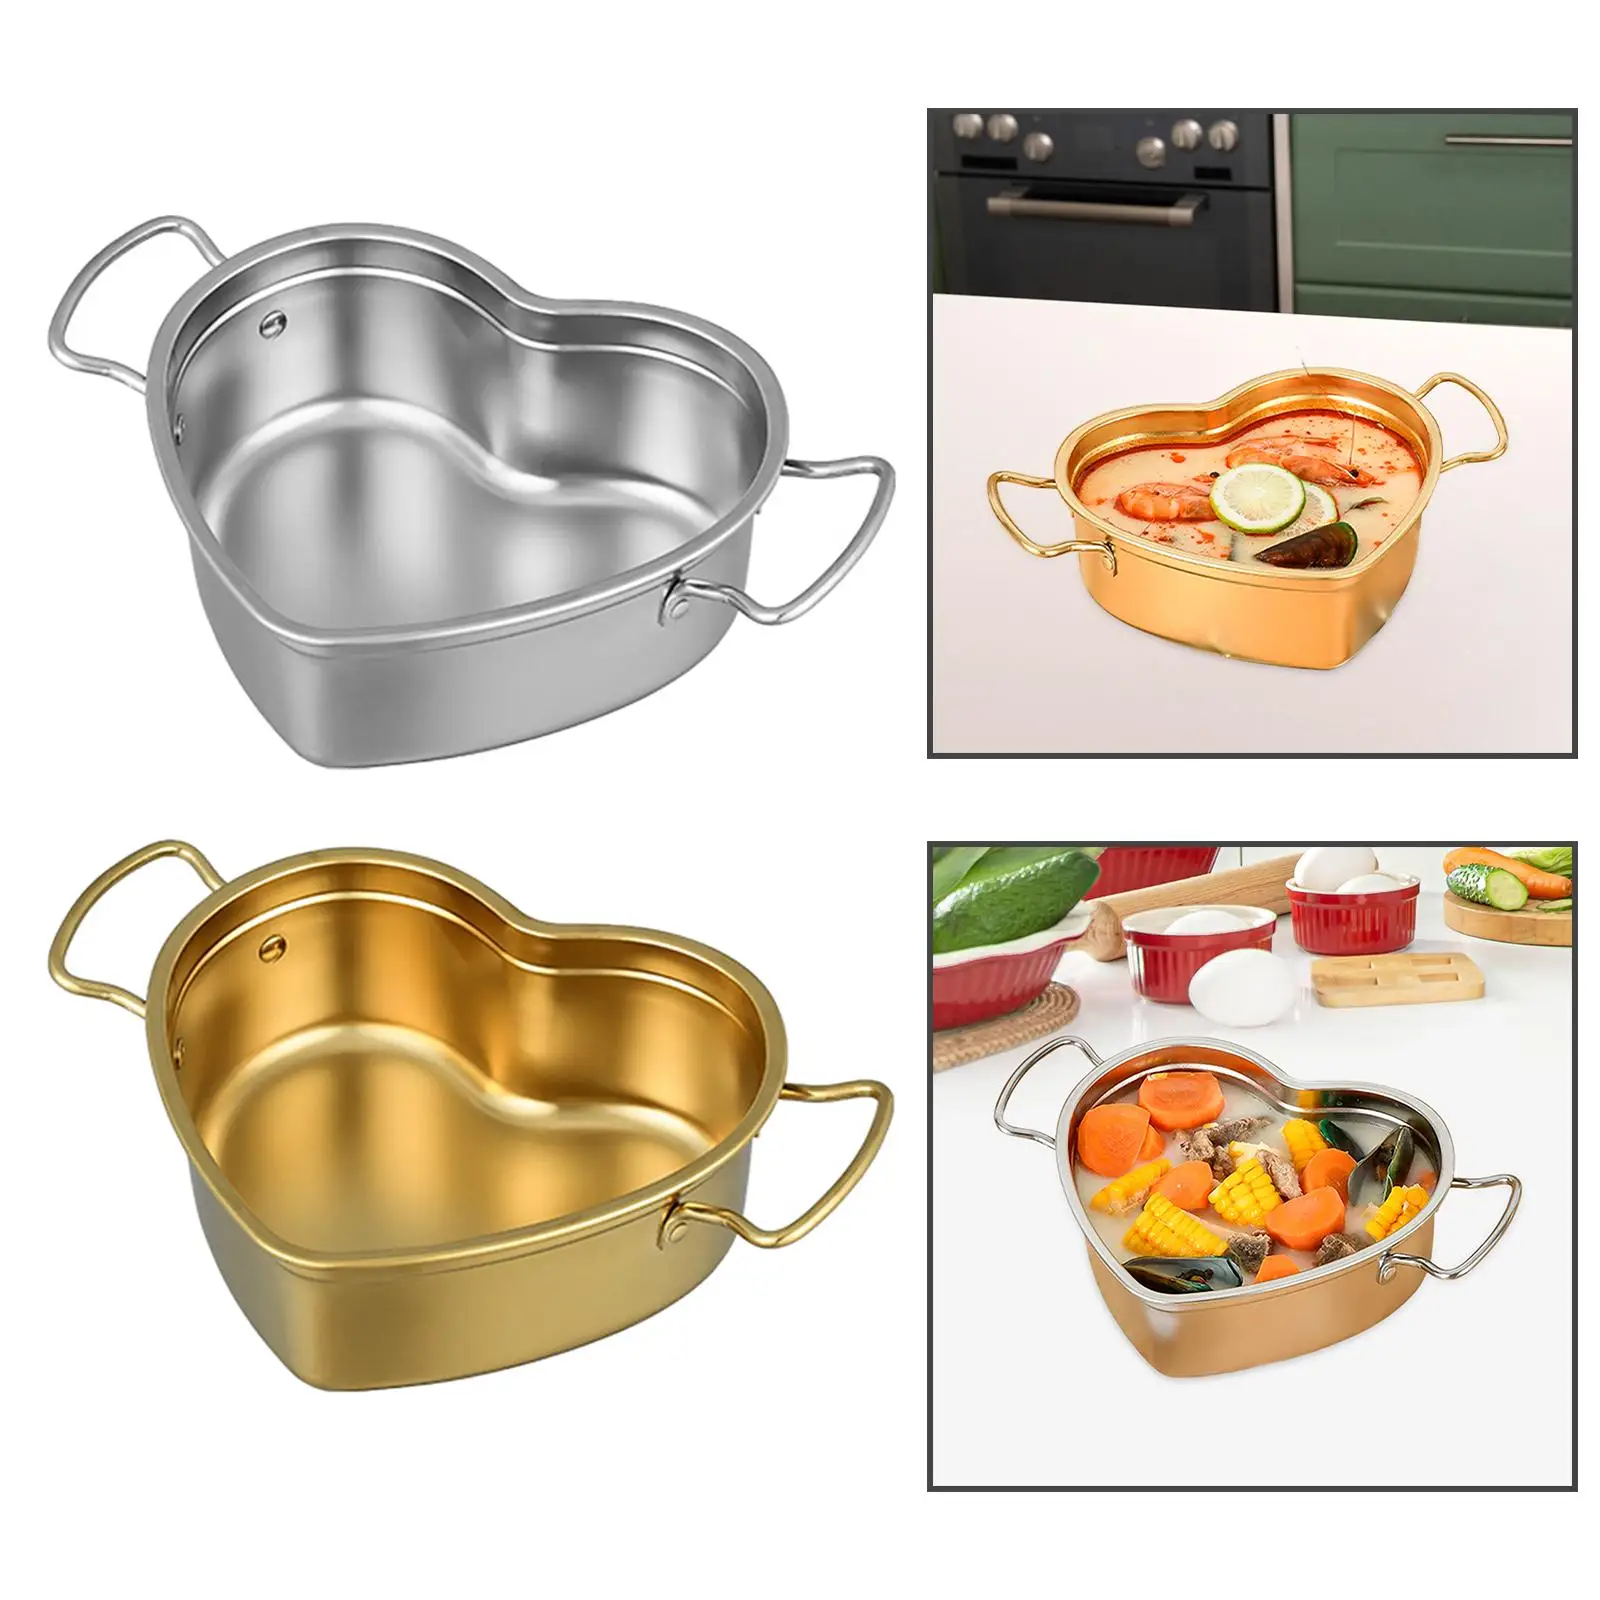 Stainless Steel Stockpot with Doubles Handle Milk Heating Pot for Home